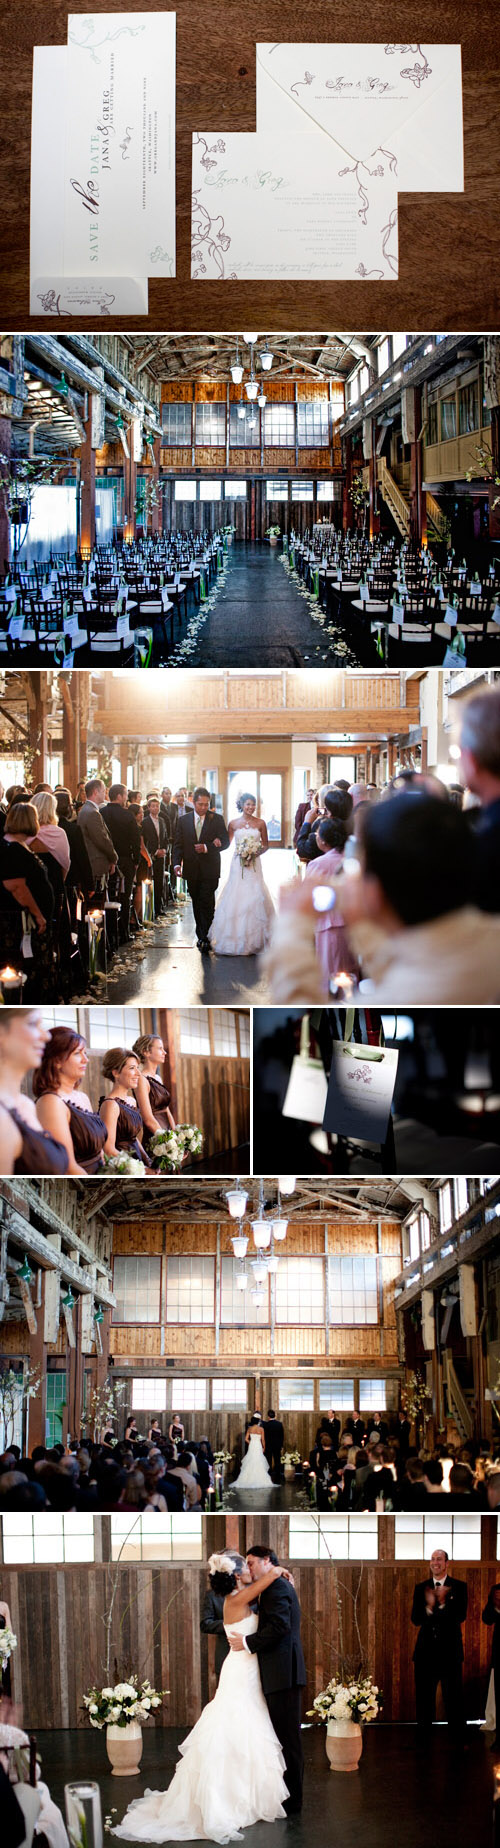 Seattle rustic eco-chic wedding ceremony at Sodo Park by Herban Feast, images by John and Joseph Photography